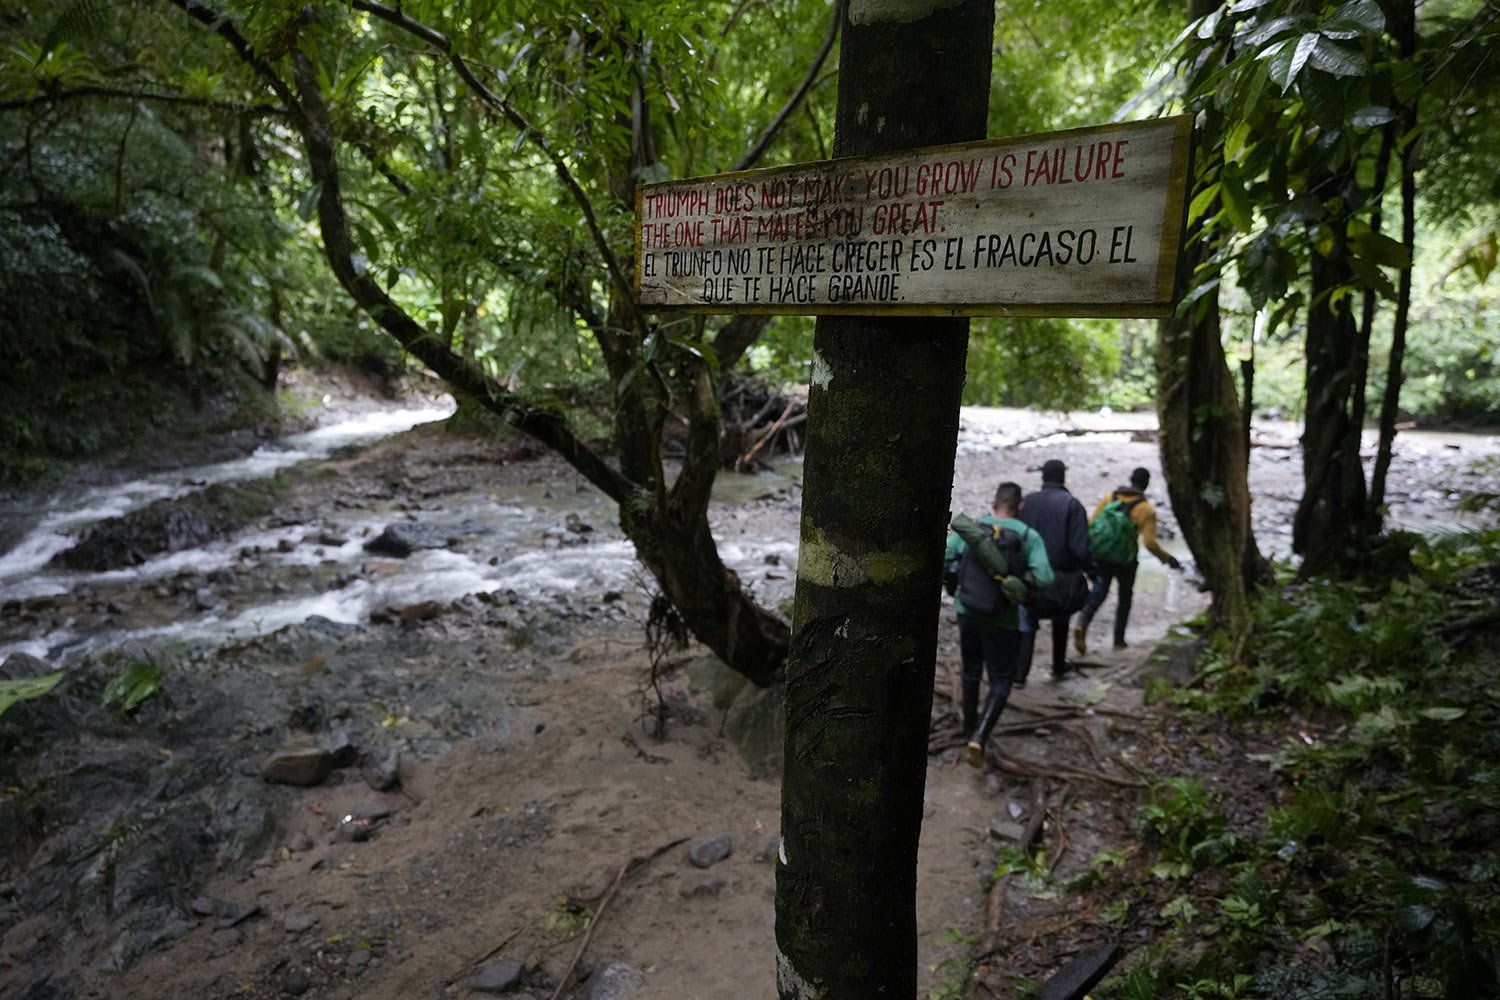  A bilingual sign stands on the route used by migrants to cross the Darien Gap, from Colombia into Panama, who hope to reach the U.S., Oct. 15, 2022. It reads “Triumph doesn’t make you grow. It’s failure that makes you great.” (AP Photo/Fernando Verg